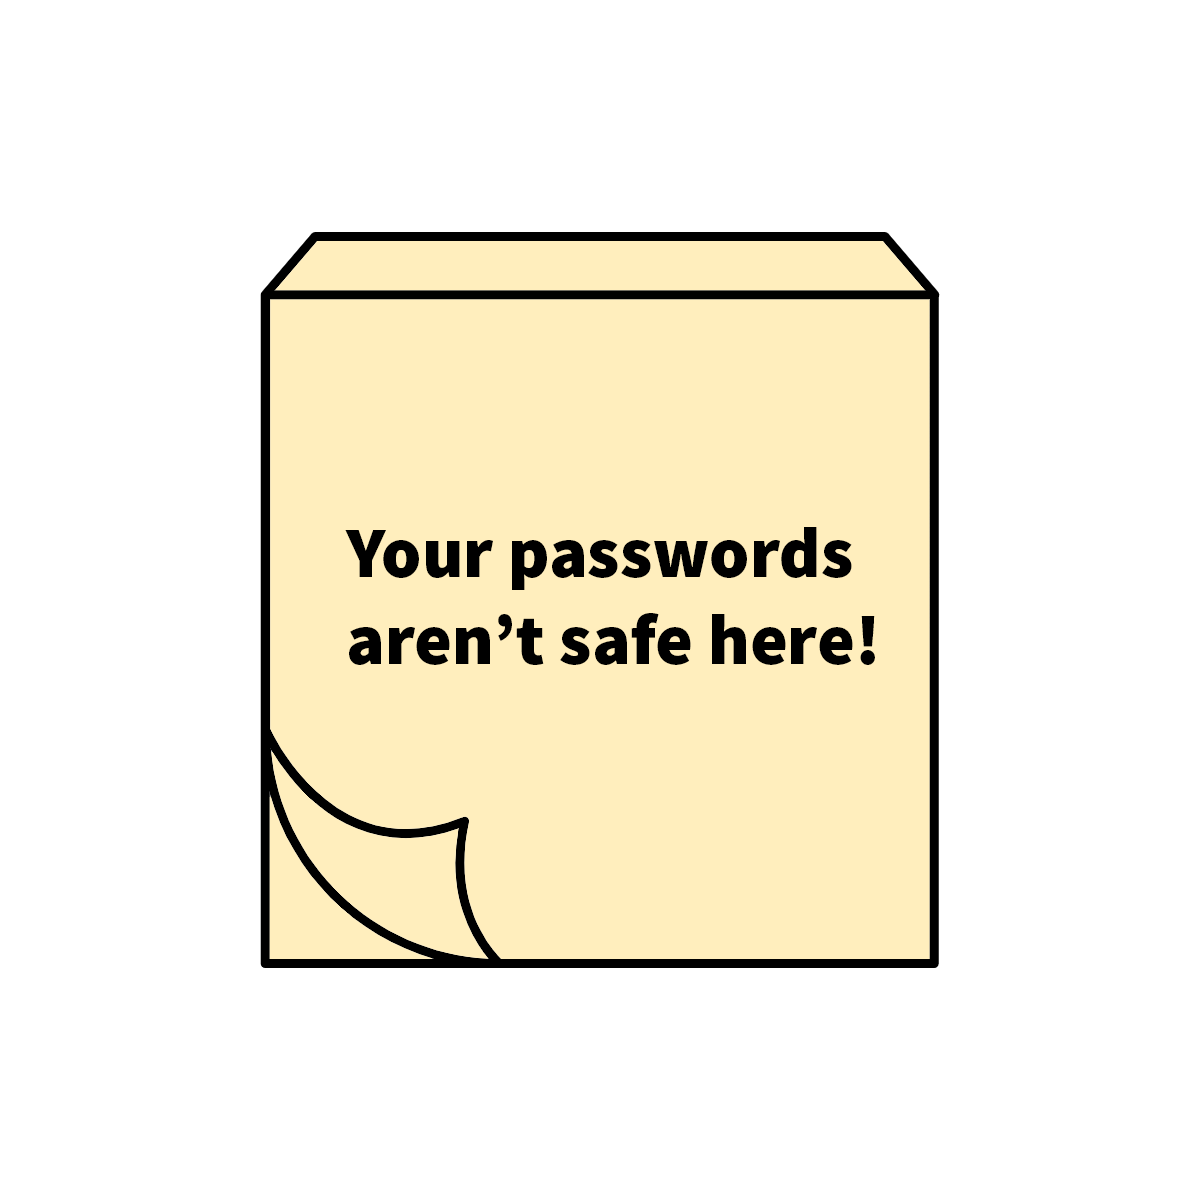 an image of a post-it note with text that says your passwords aren't safe here